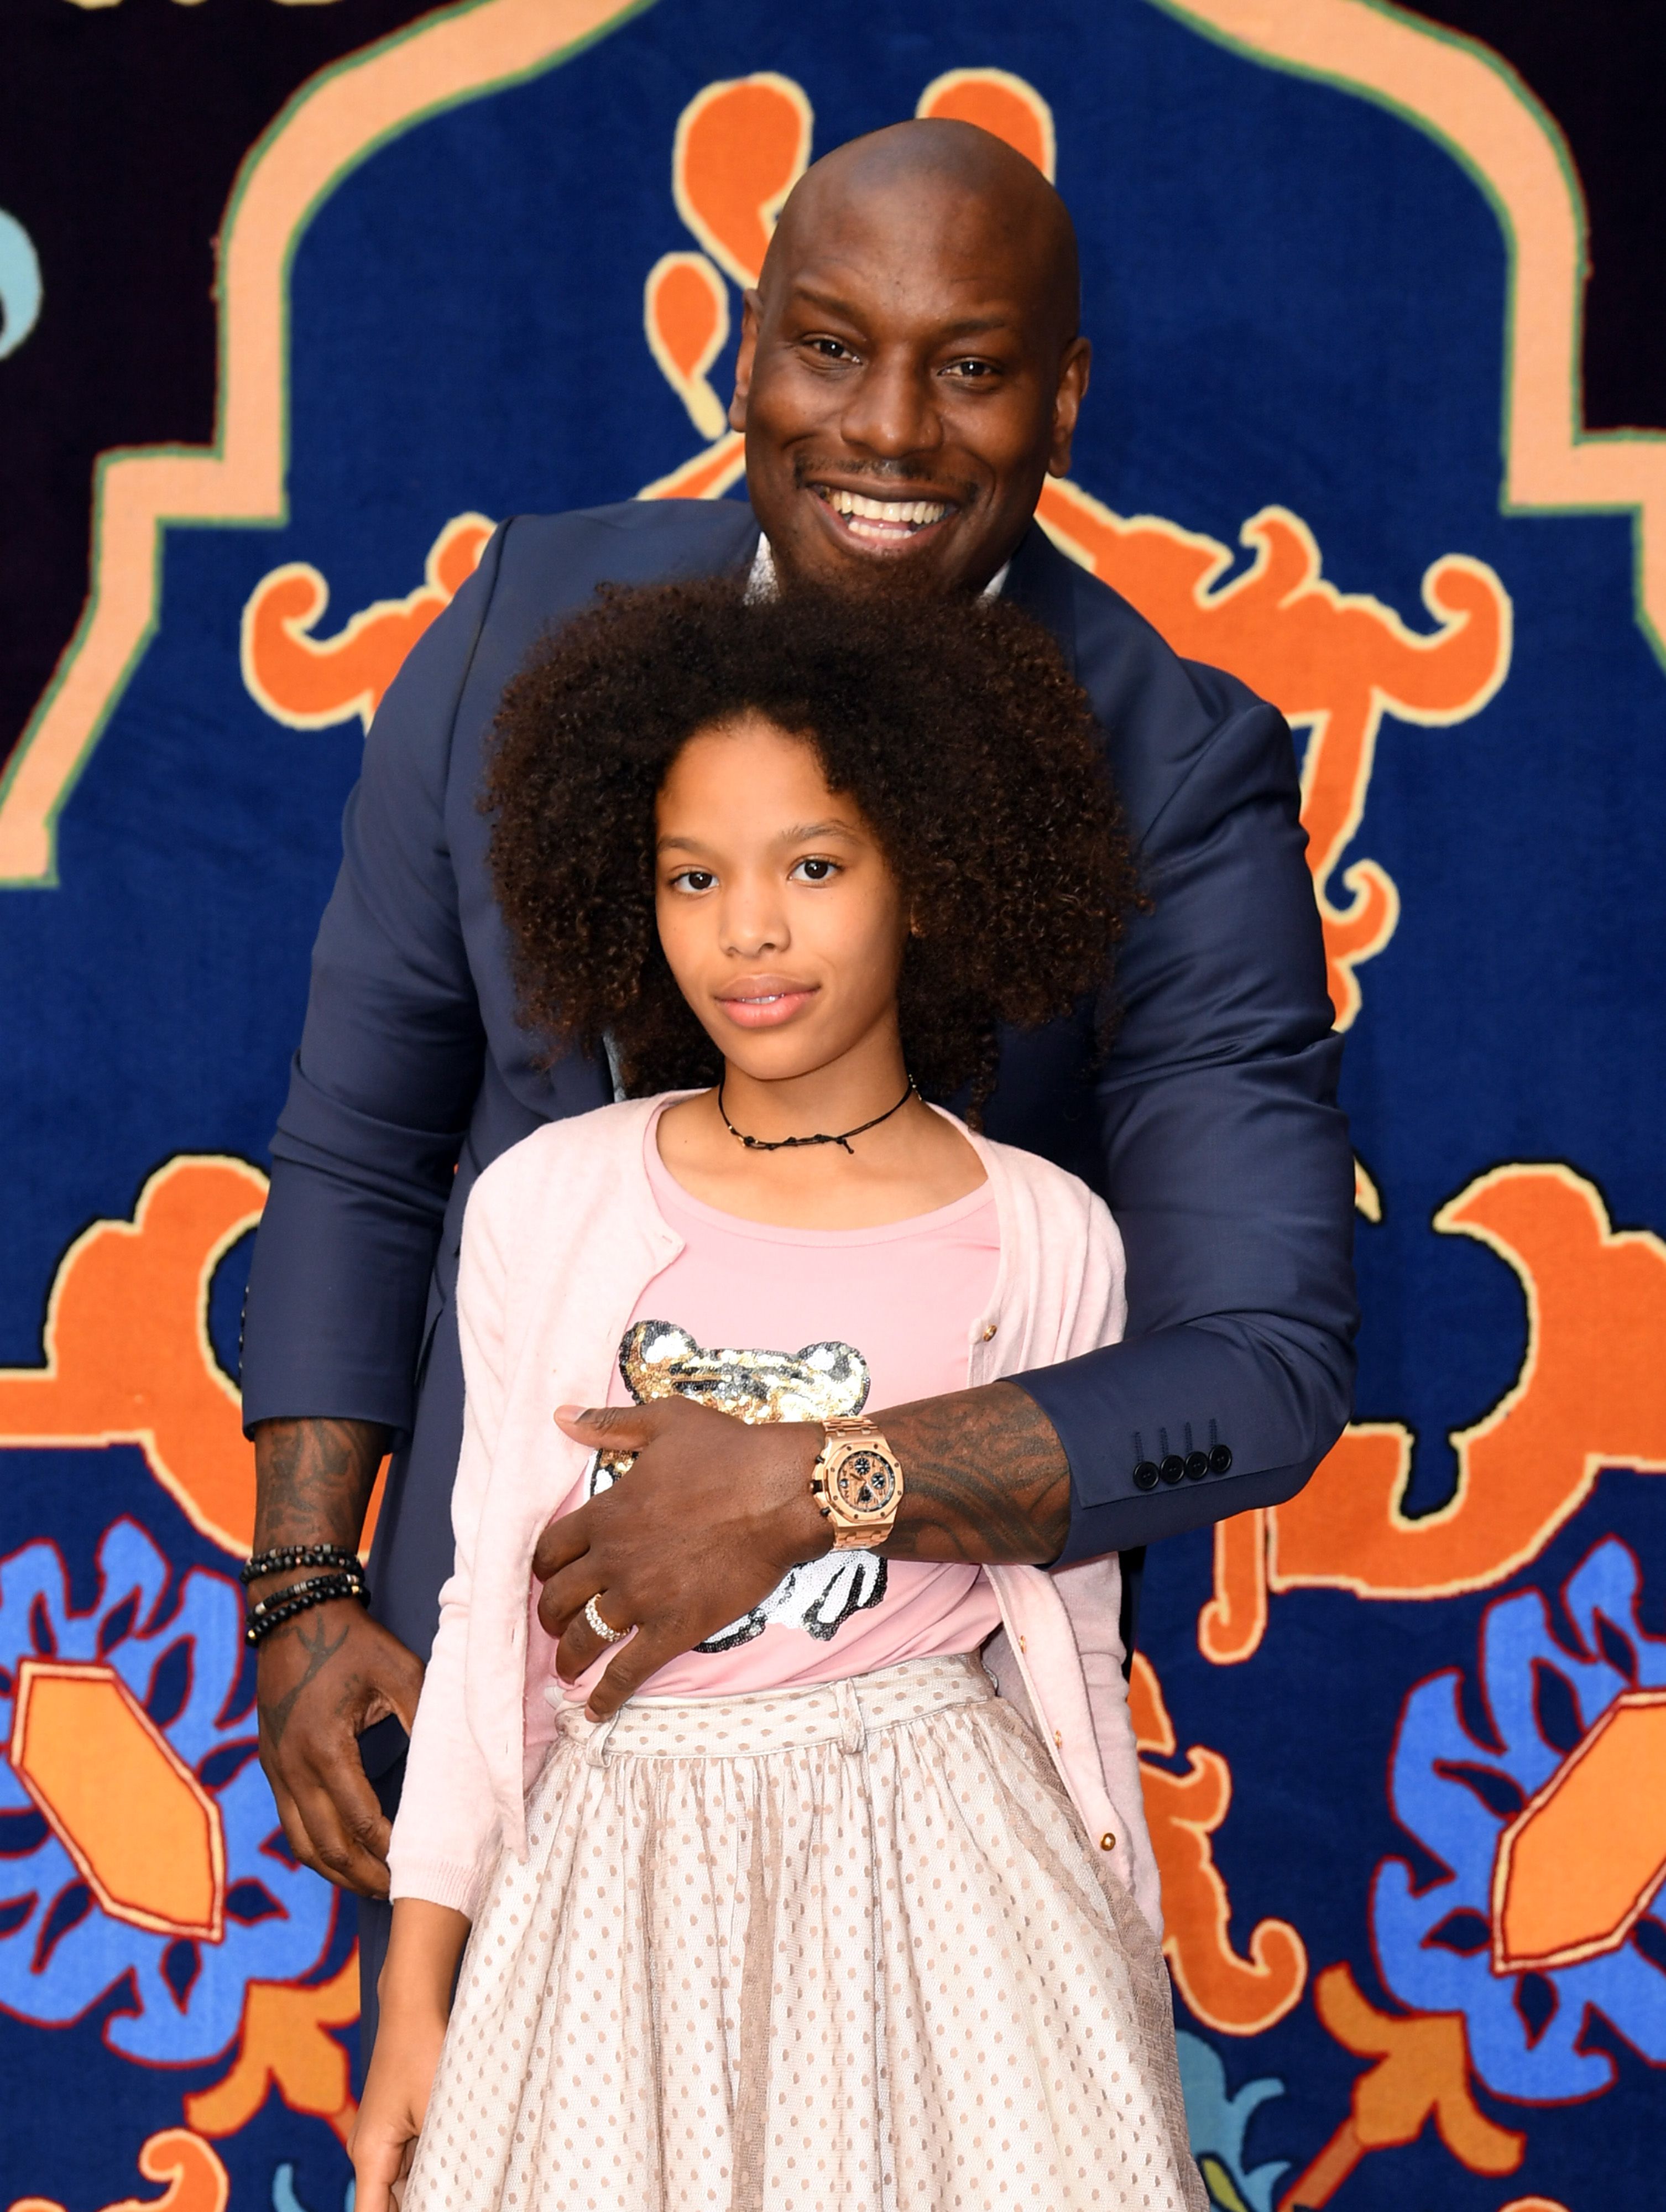 Tyrese Gibson and Shayla Somer Gibson during the premiere of Disney's "Aladdin" at El Capitan Theatre on May 21, 2019, in Los Angeles, California. | Source: Getty Images